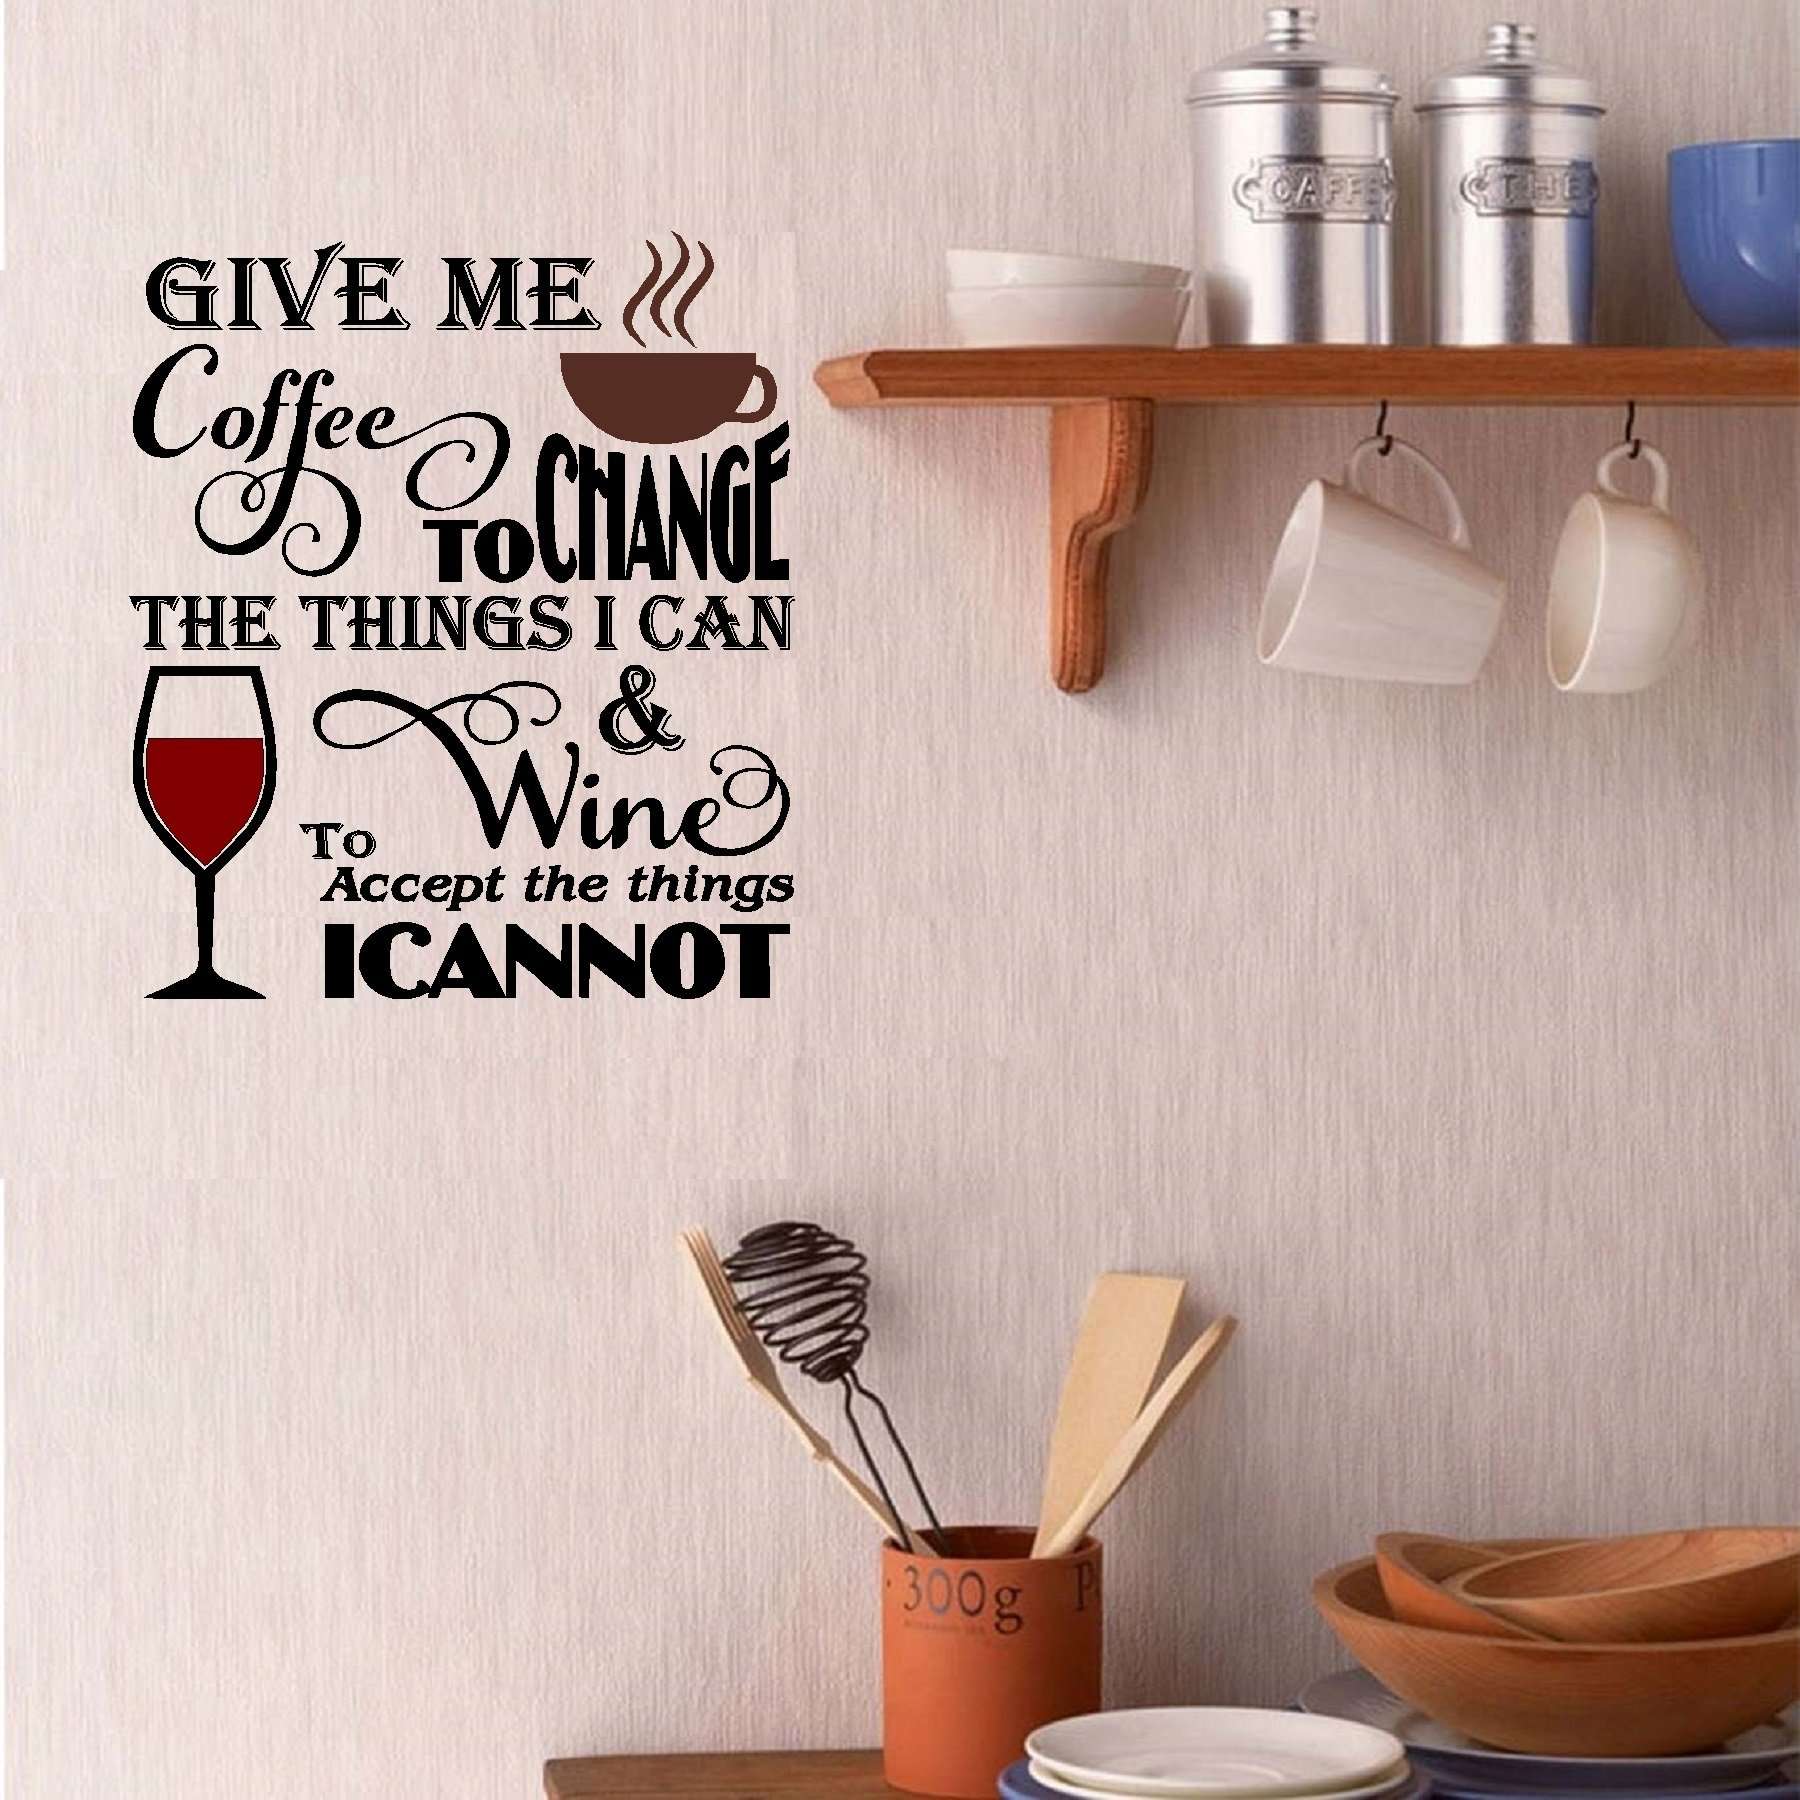 Give me Coffee to change the things I can, and Wine to ...